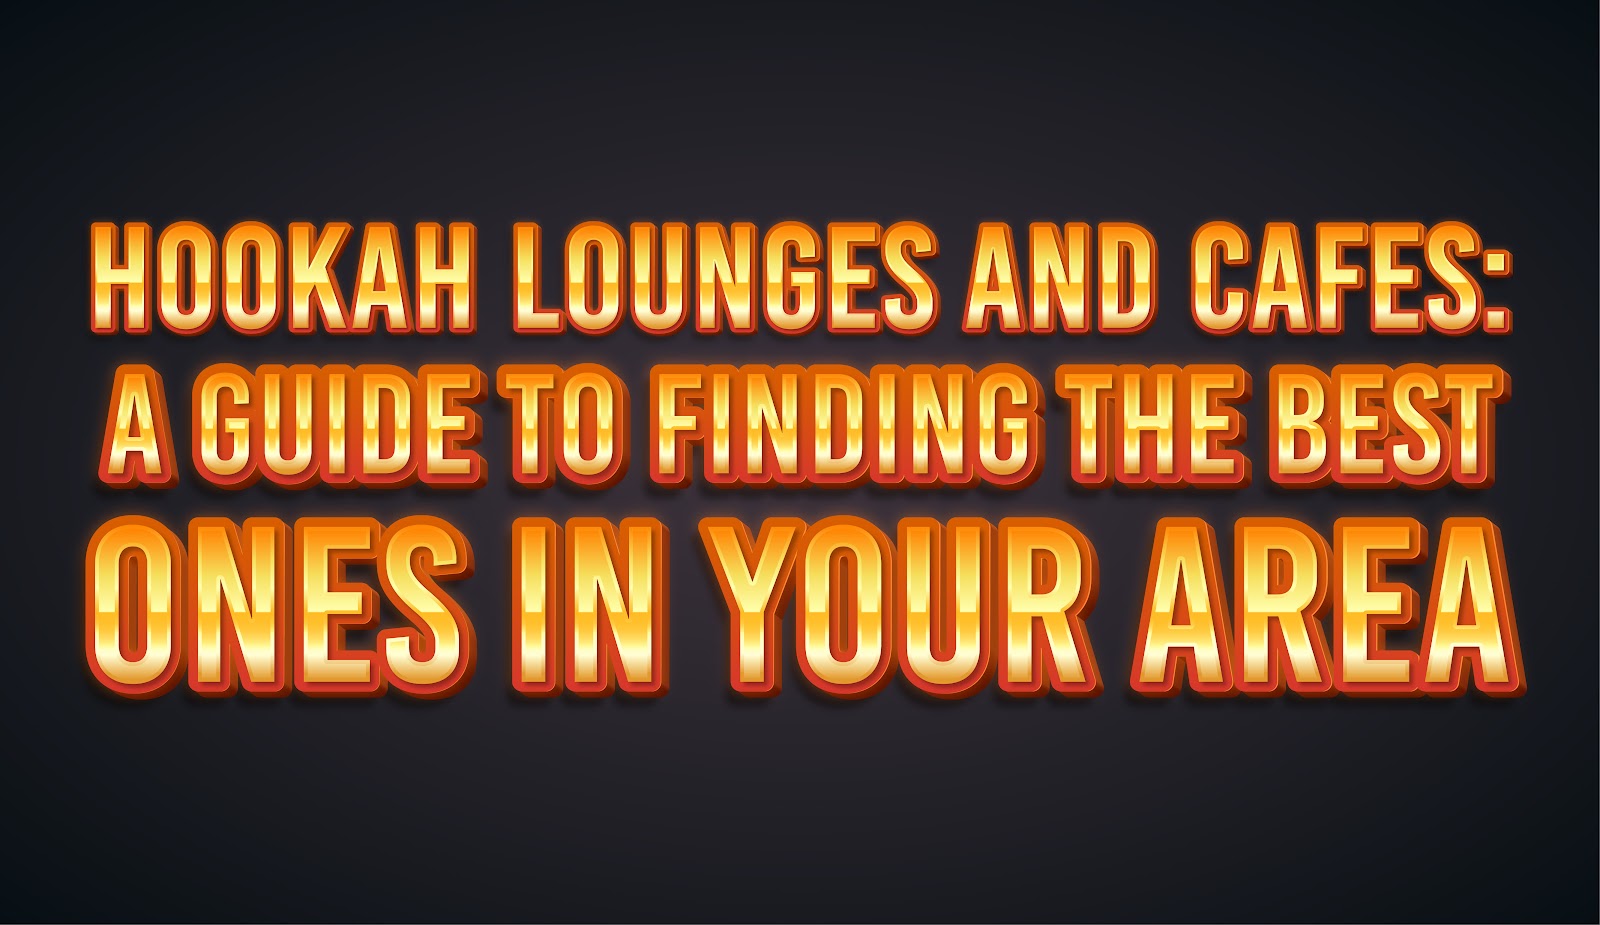 Hookah Lounges and Cafes: A Guide To Finding the Best Ones in Your Area